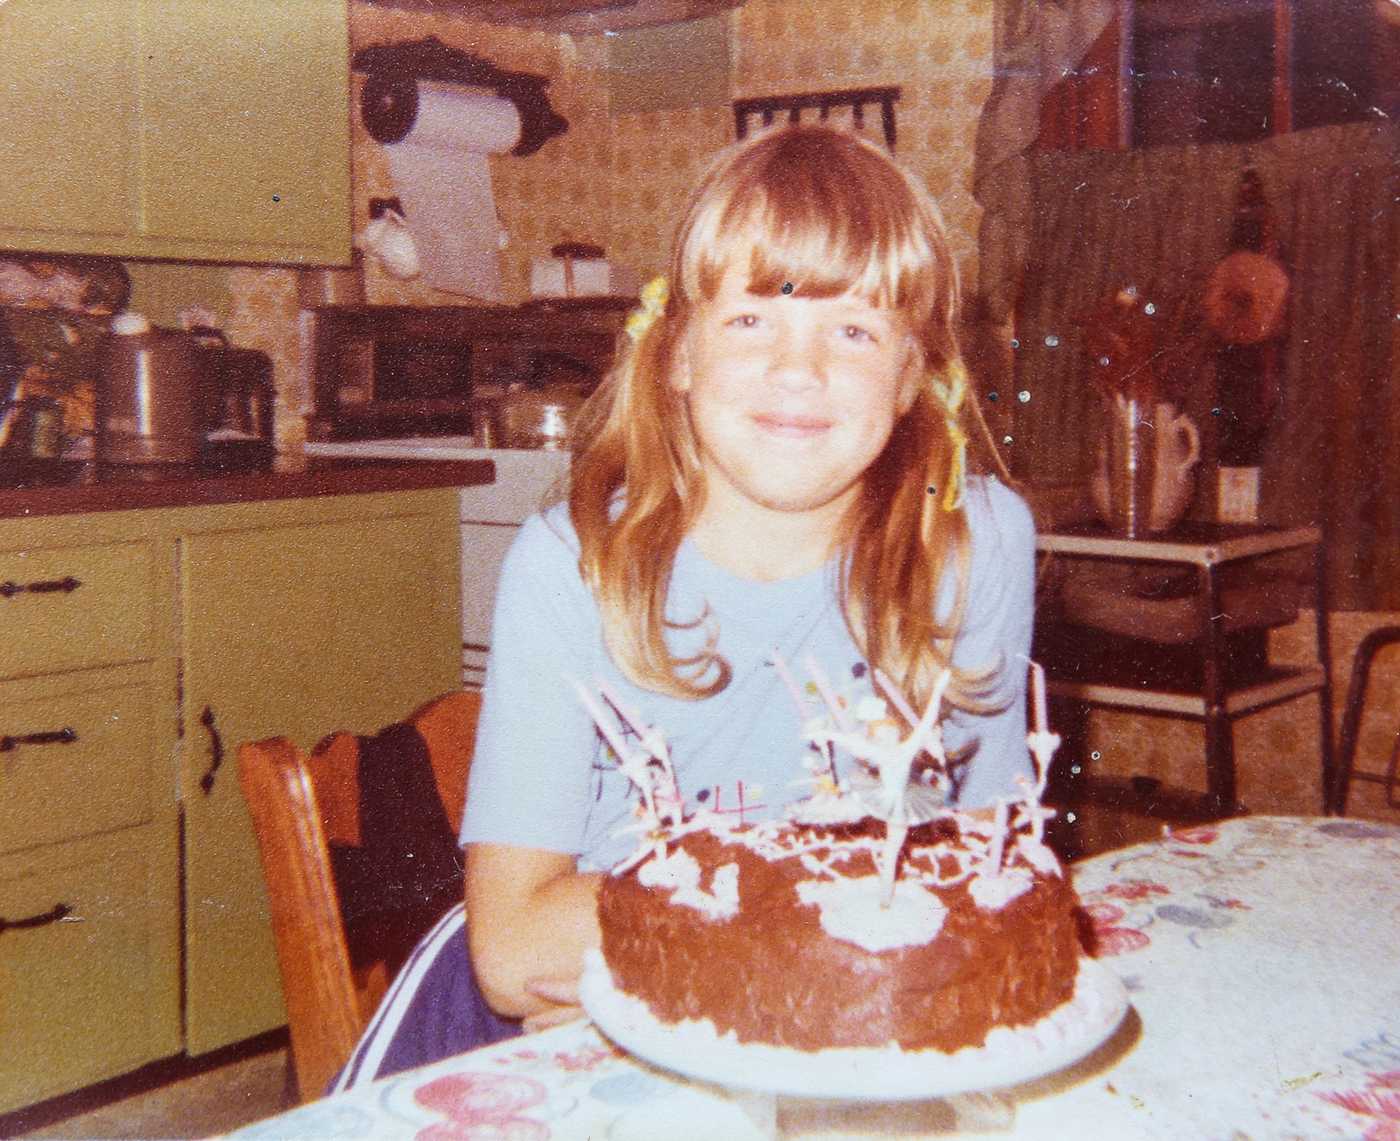 Kate smiles in front of the birthday cake her mother made her for her 10th birthday. 
